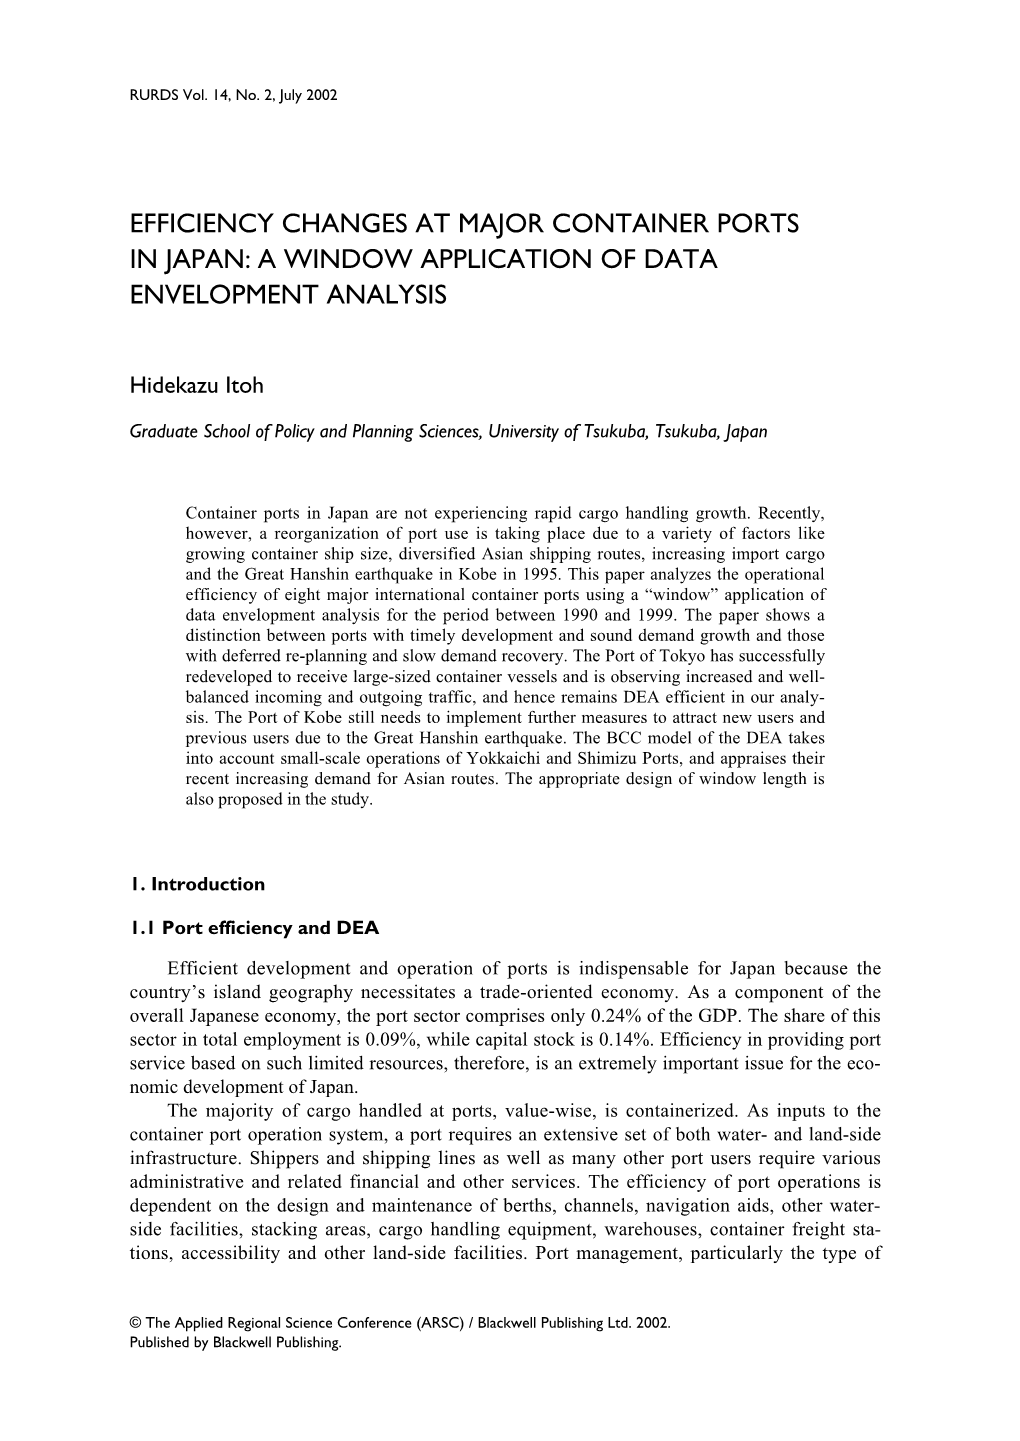 Efficiency Changes at Major Container Ports in Japan: a Window Application of Data Envelopment Analysis